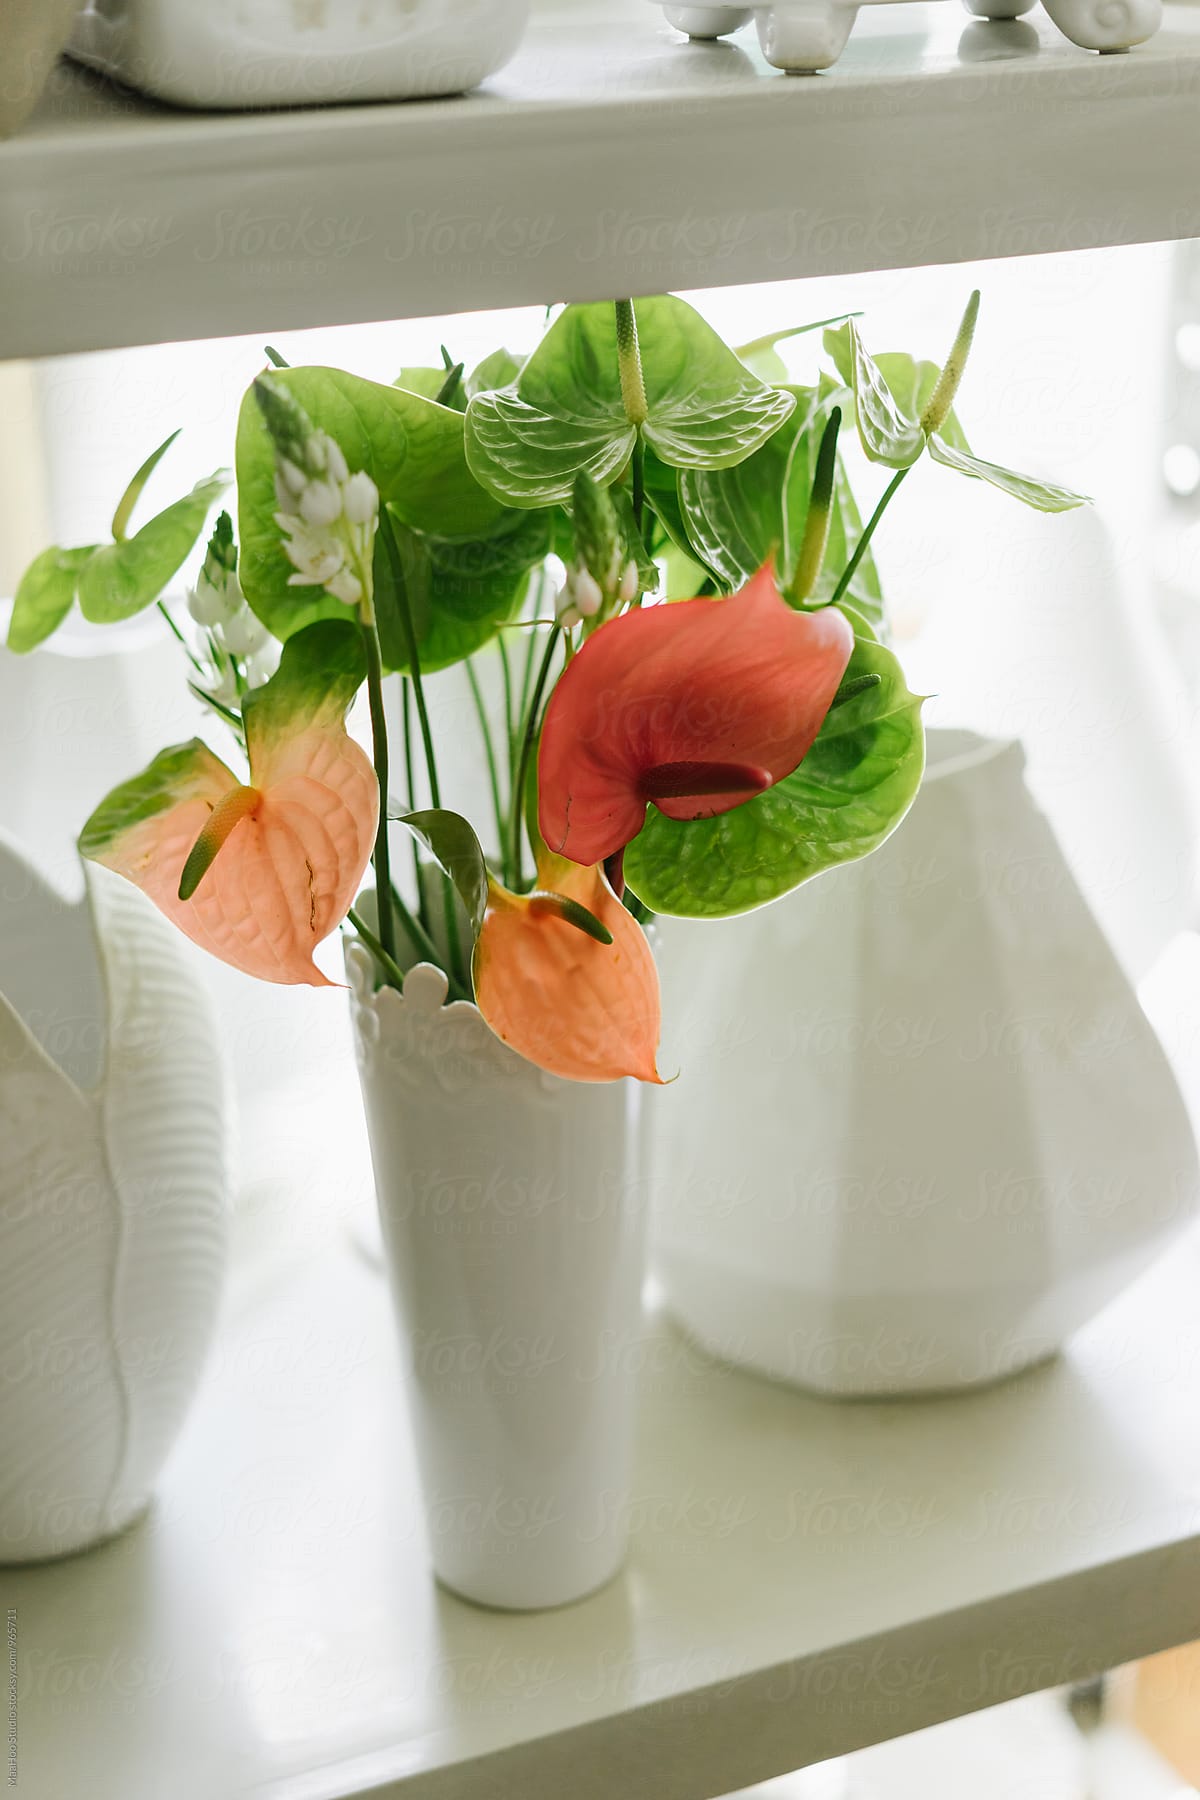 Shelf with empty vases and bouquet of flower